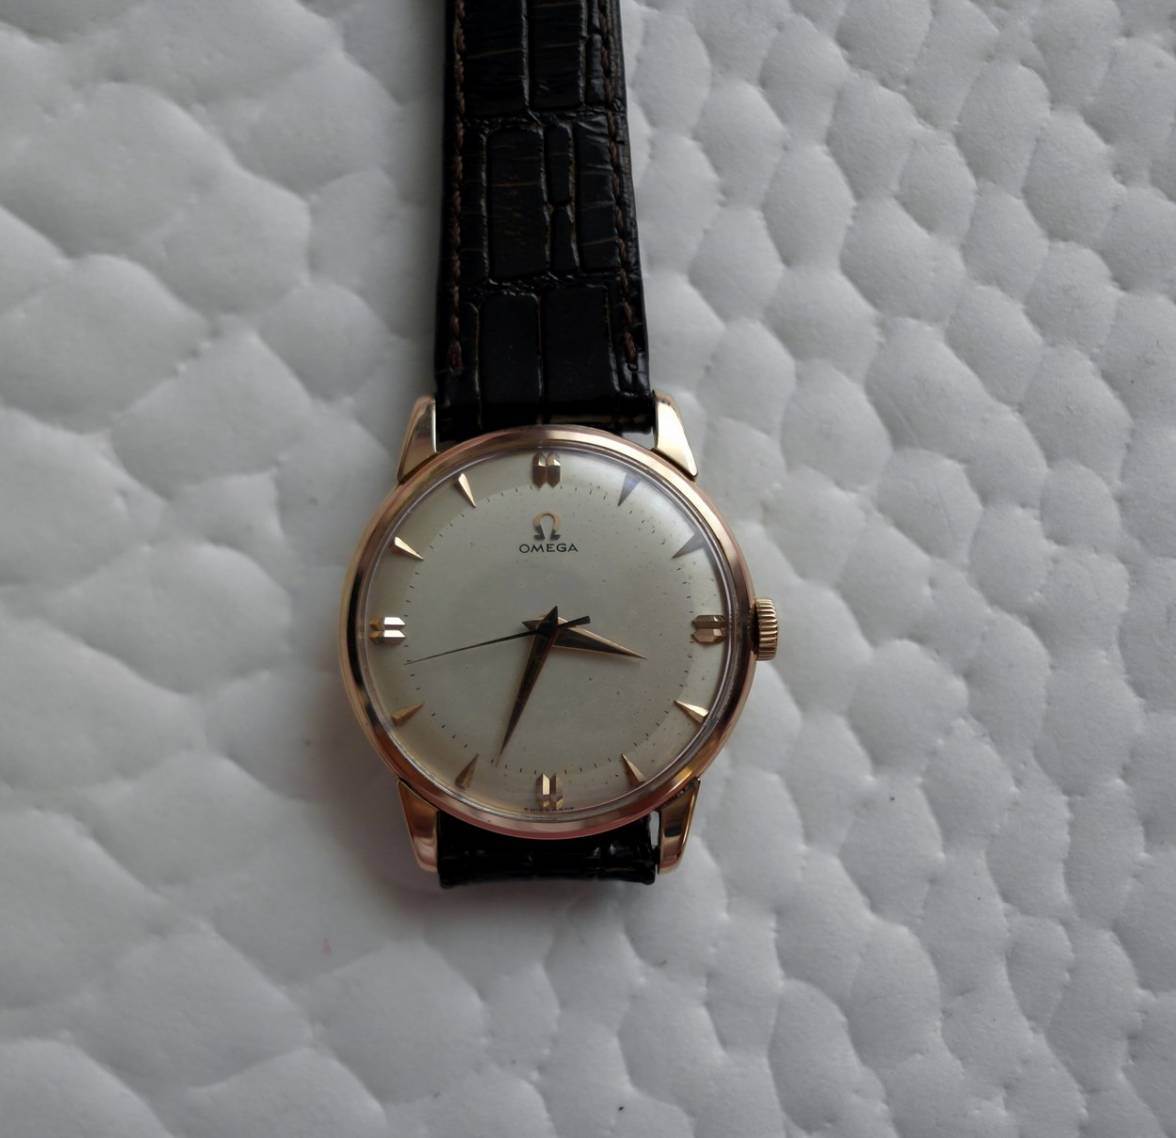 WITHDRAWN - An absolutely stunning 1959 Vintage Omega Trésor in solid ...